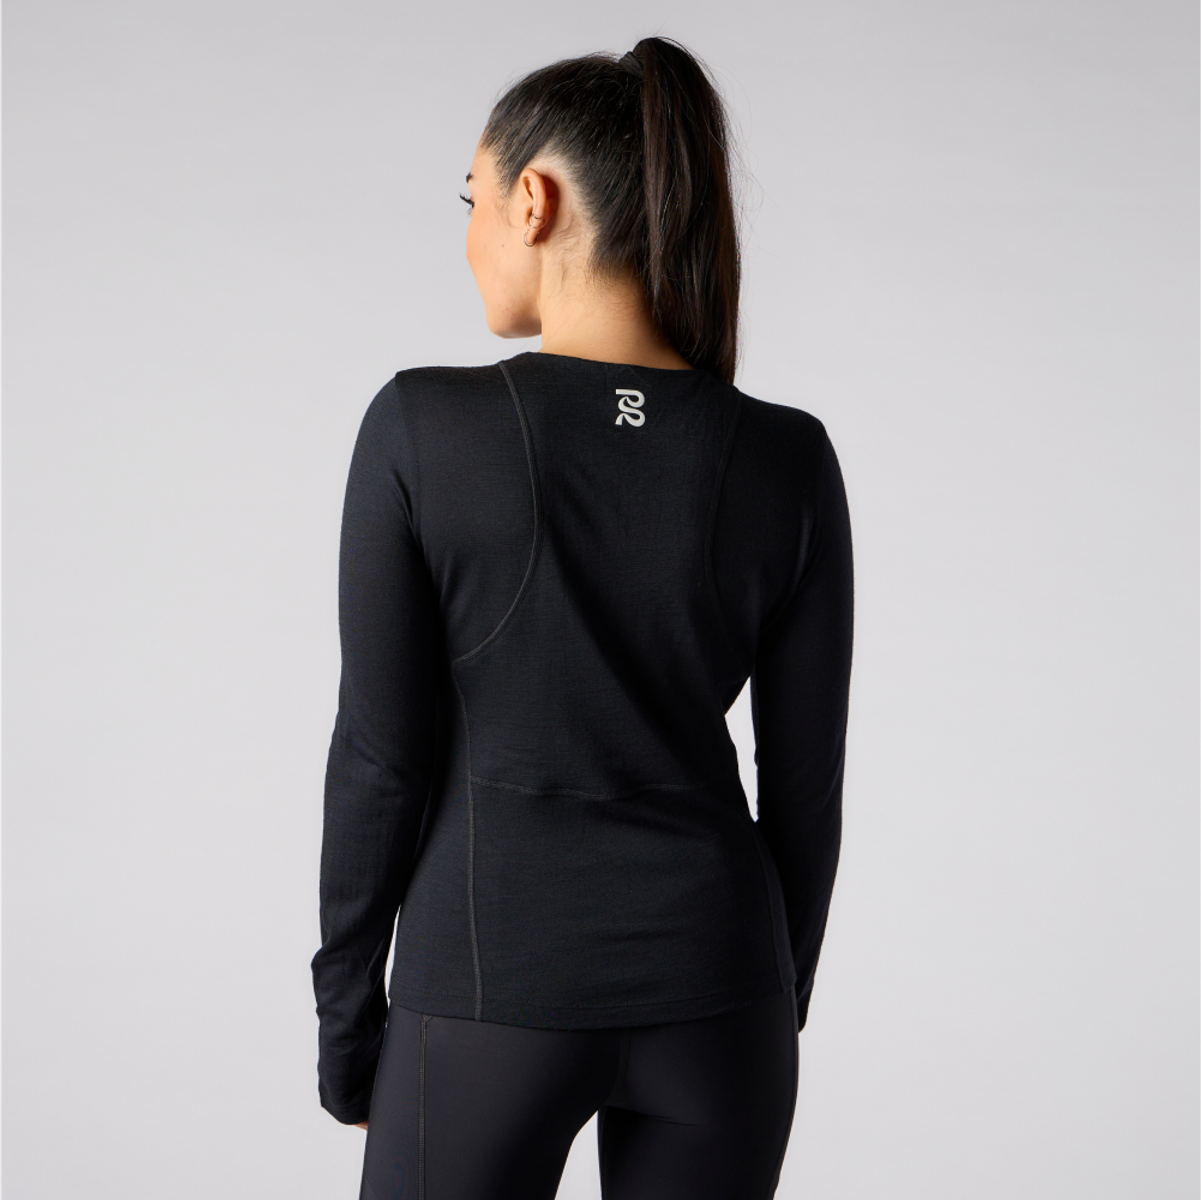 BOSSFITTED Black and Yellow Women's Elite Squad Long Sleeve Compression  Shirt